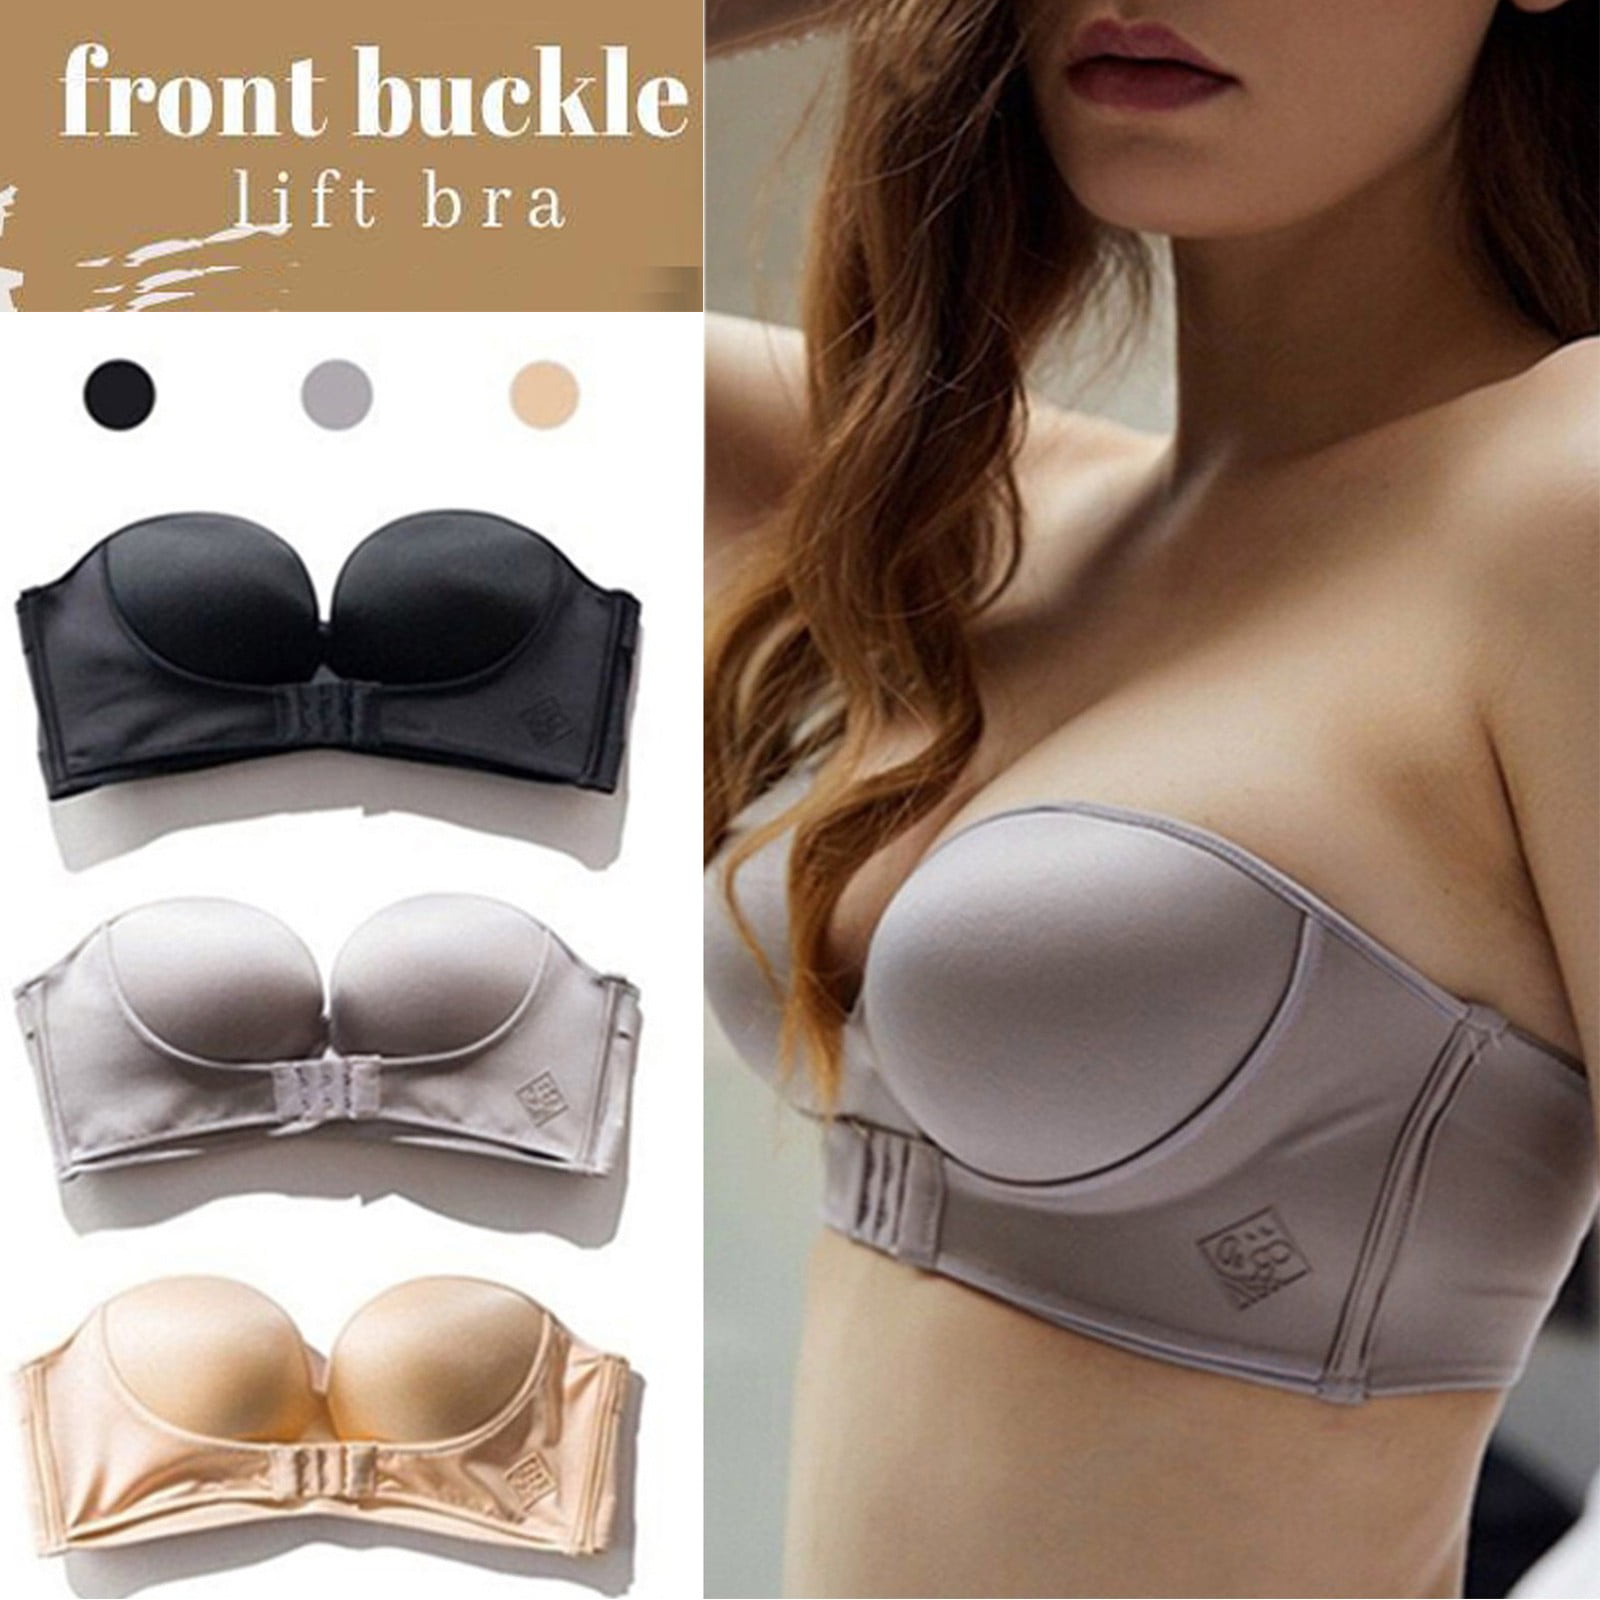 Side Slimming Lace Push-Up Bra (F85, G85, H85 Cup)